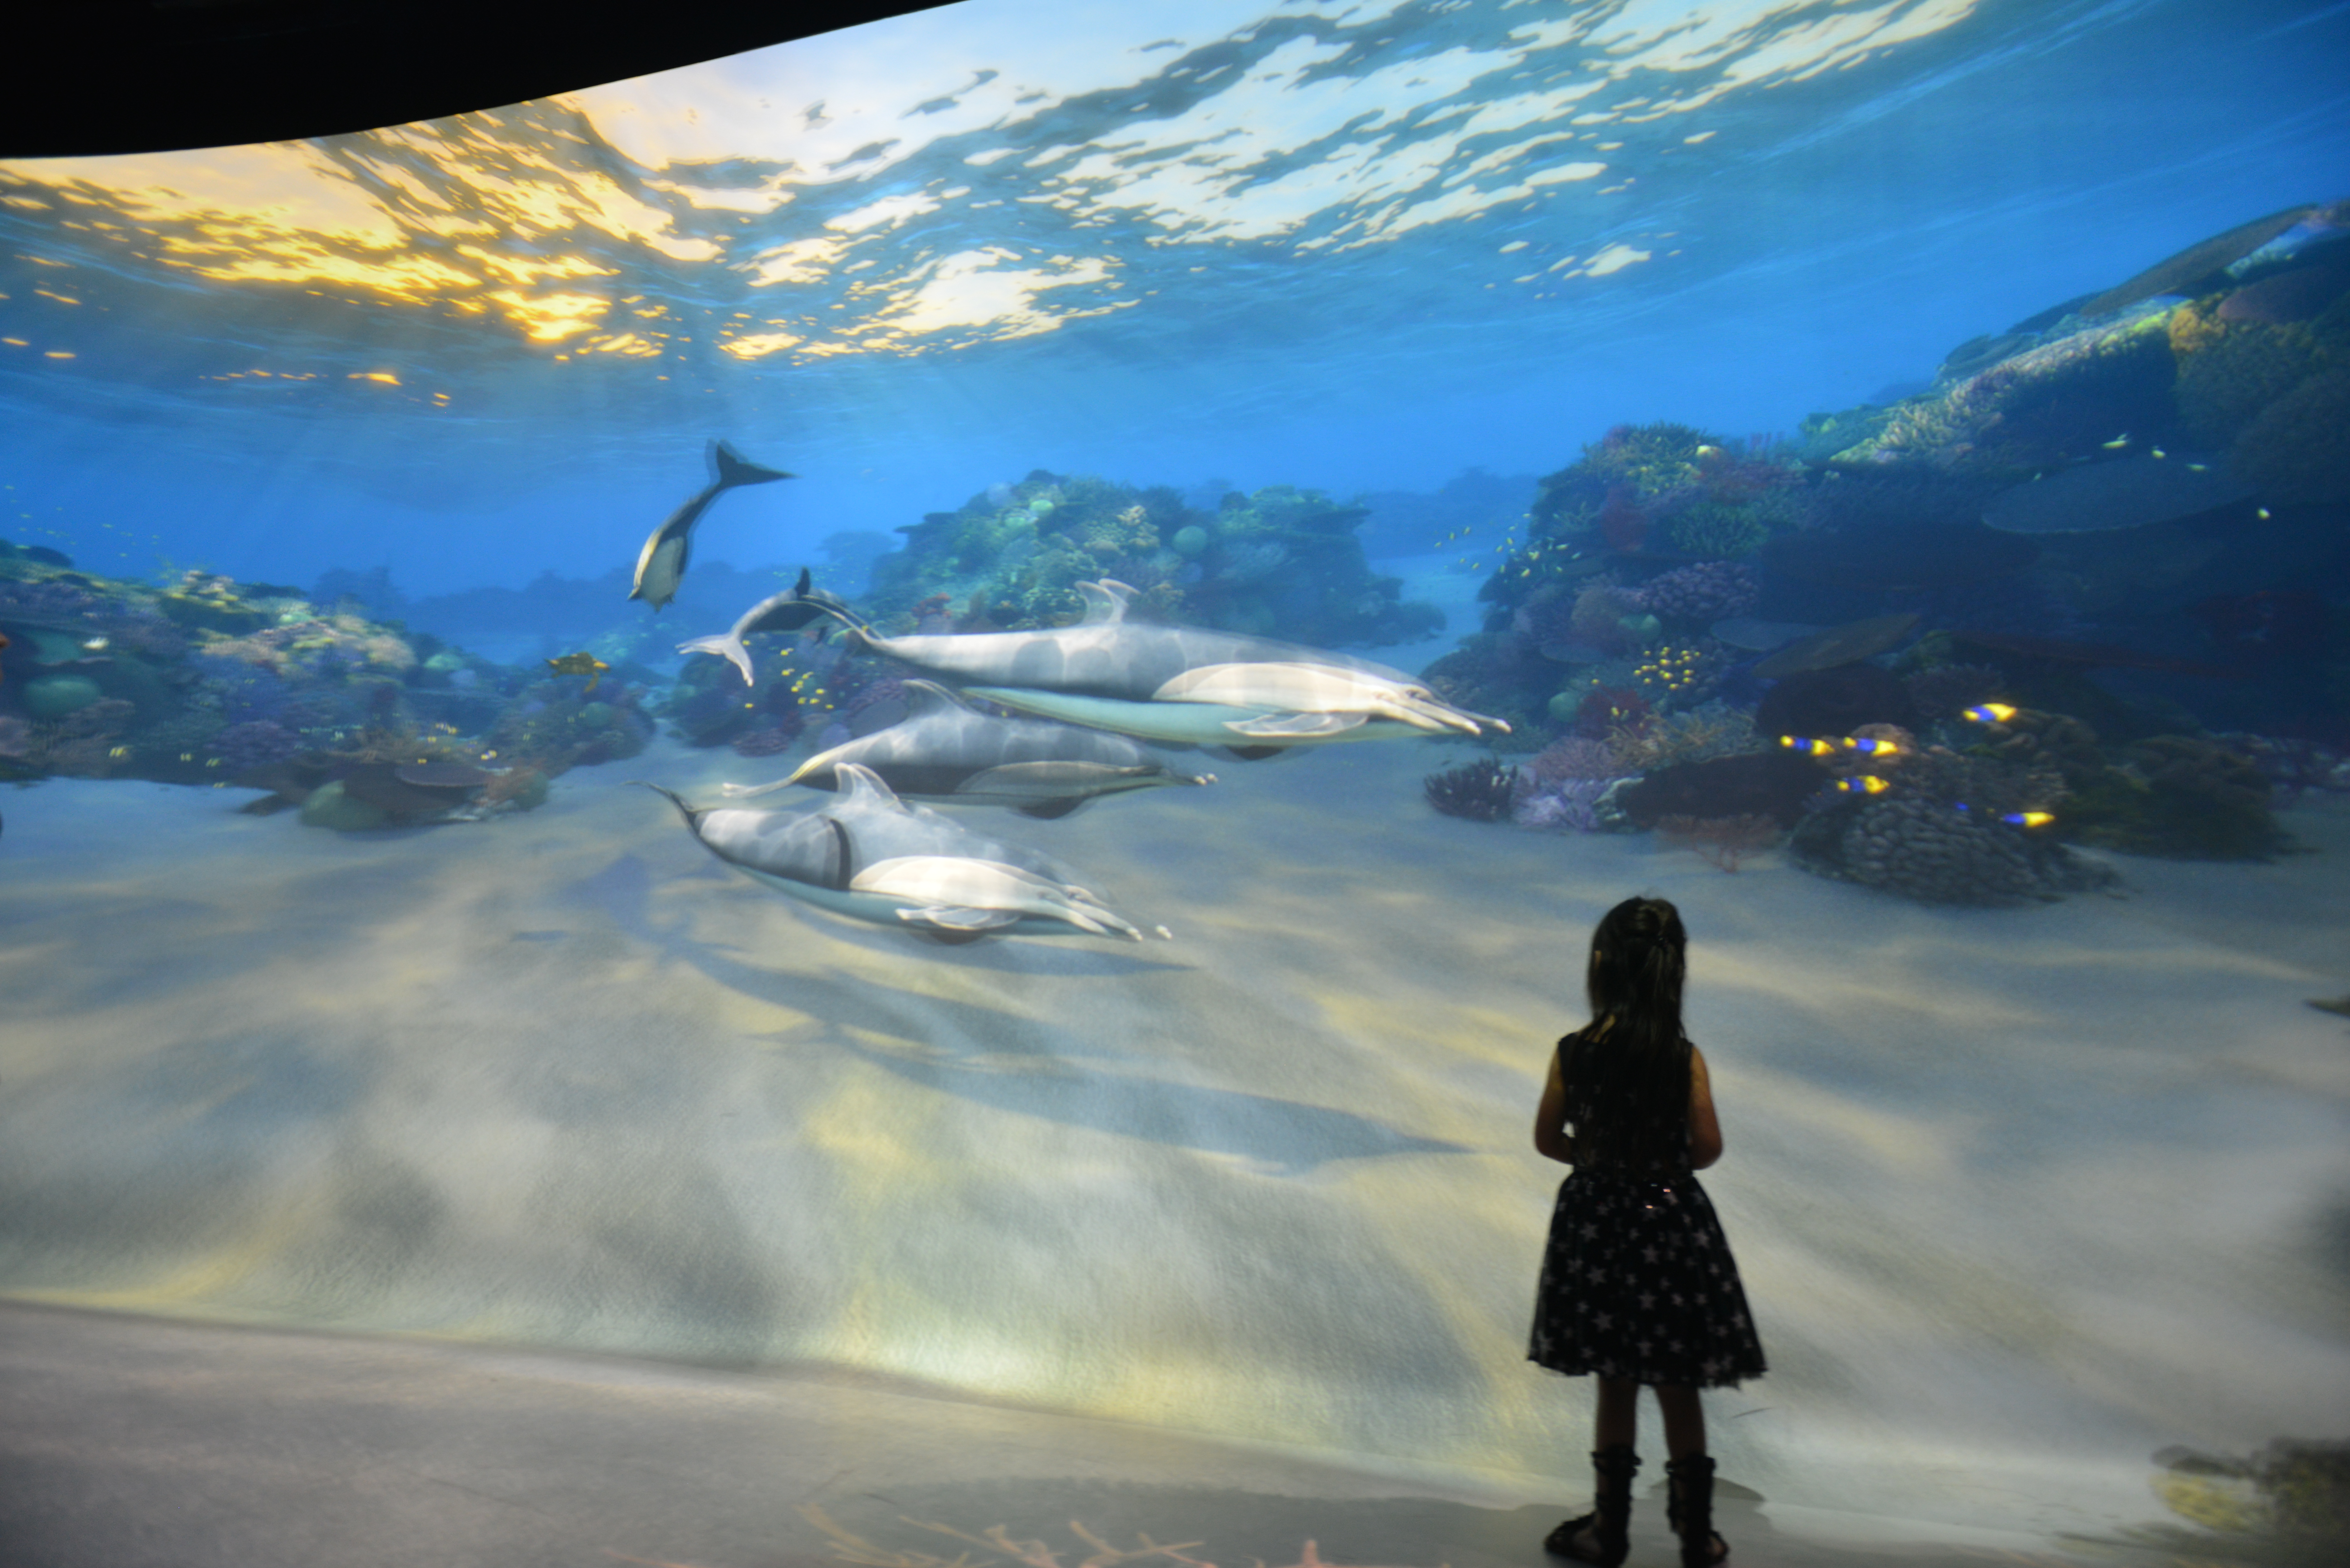 national geographic ocean odyssey, national geographic encounter, things to do times square